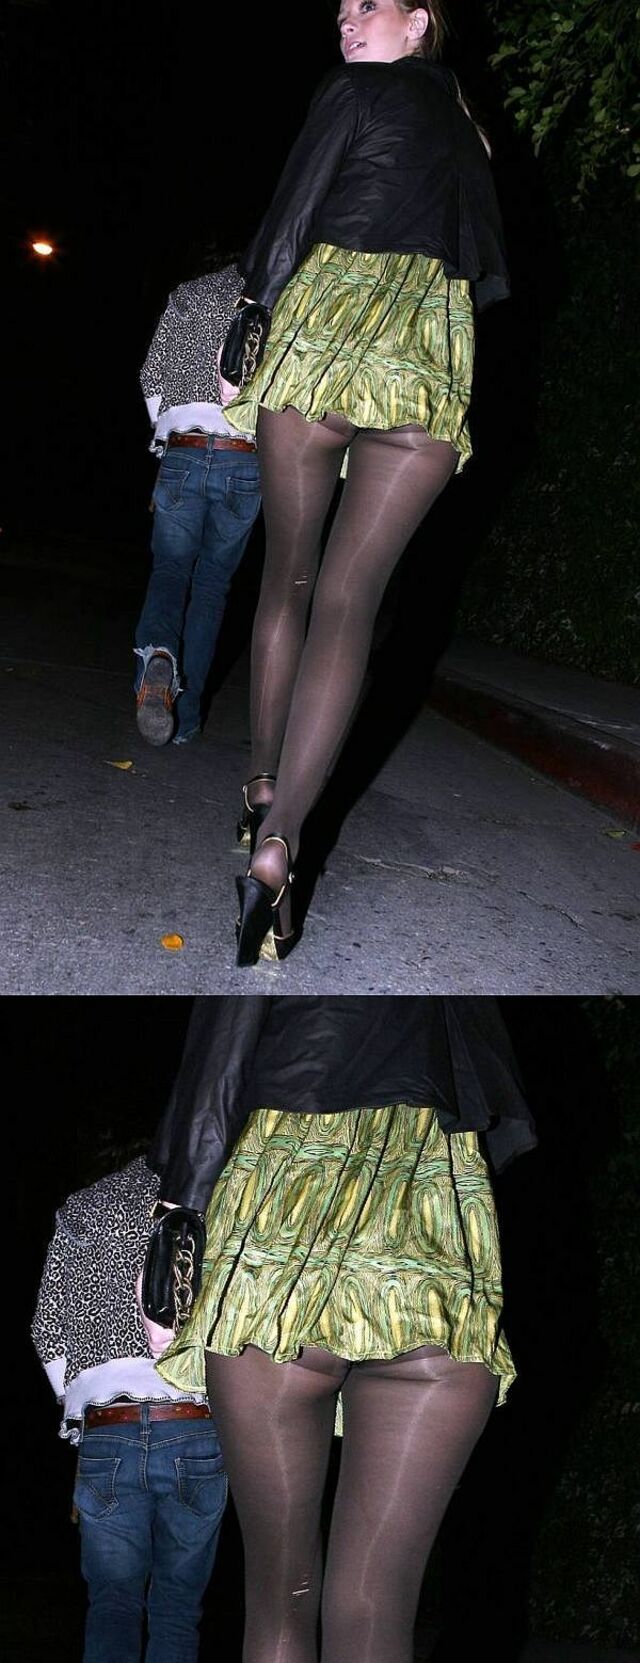 Mischa Barton Upskirt From The Rear free nude pictures